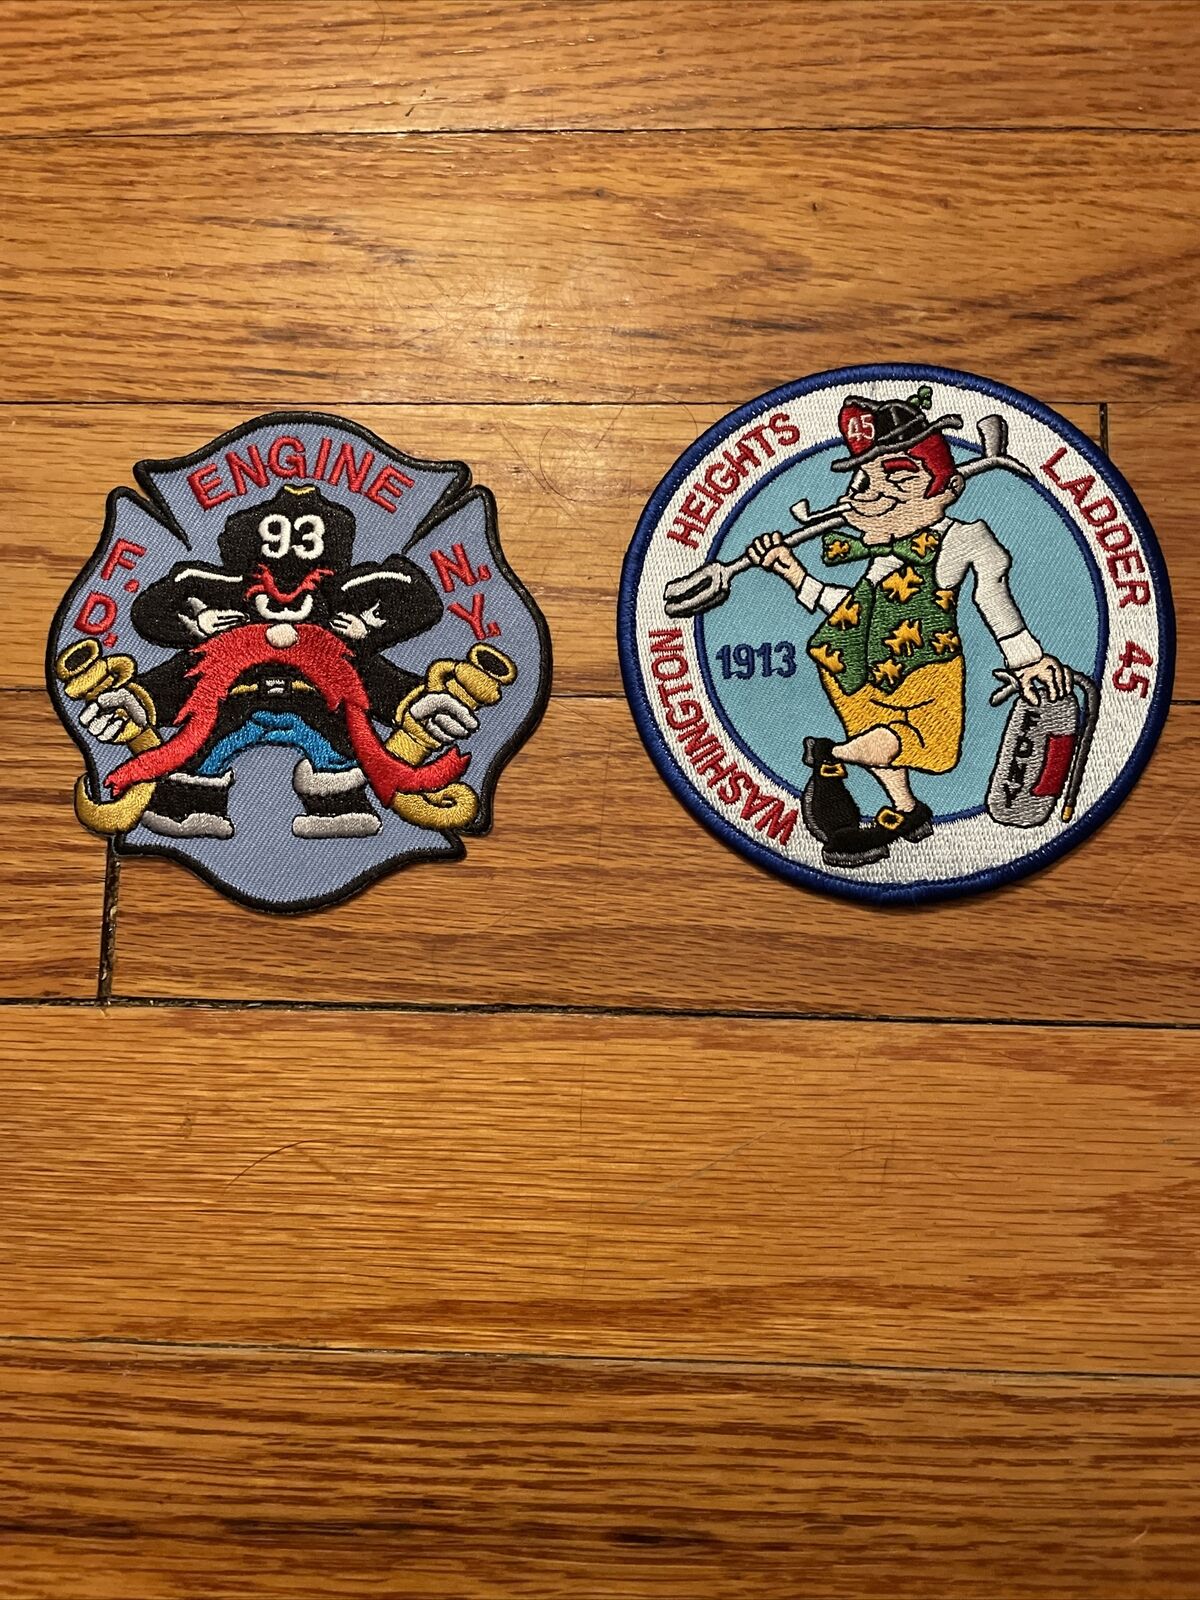 FDNY ENGINE 93 LADDER 45 PATCHES 